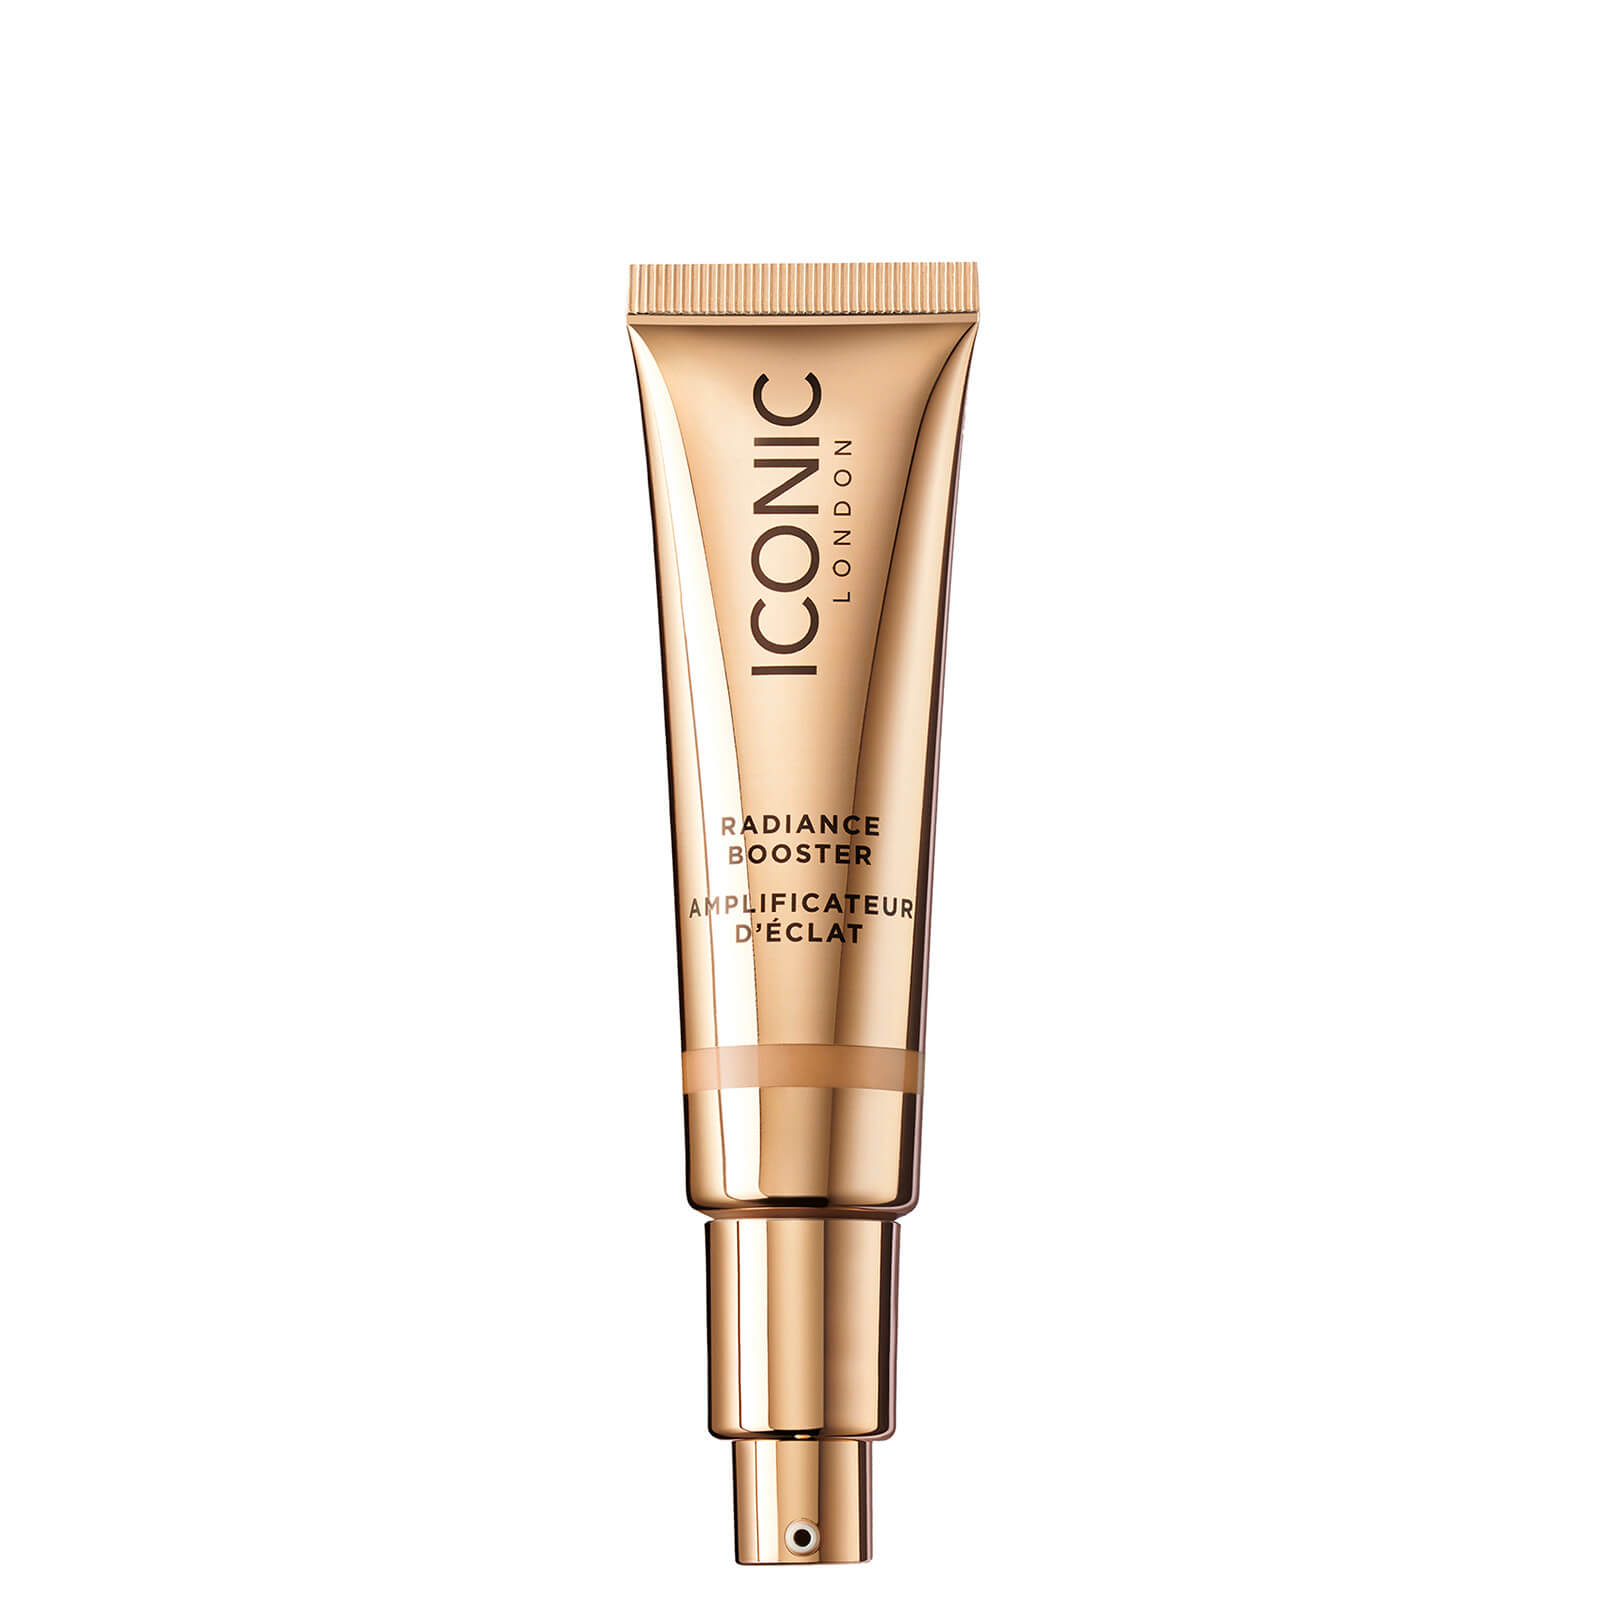 ICONIC London Radiance Booster 30ml (Various Shades) - Caramel Glow